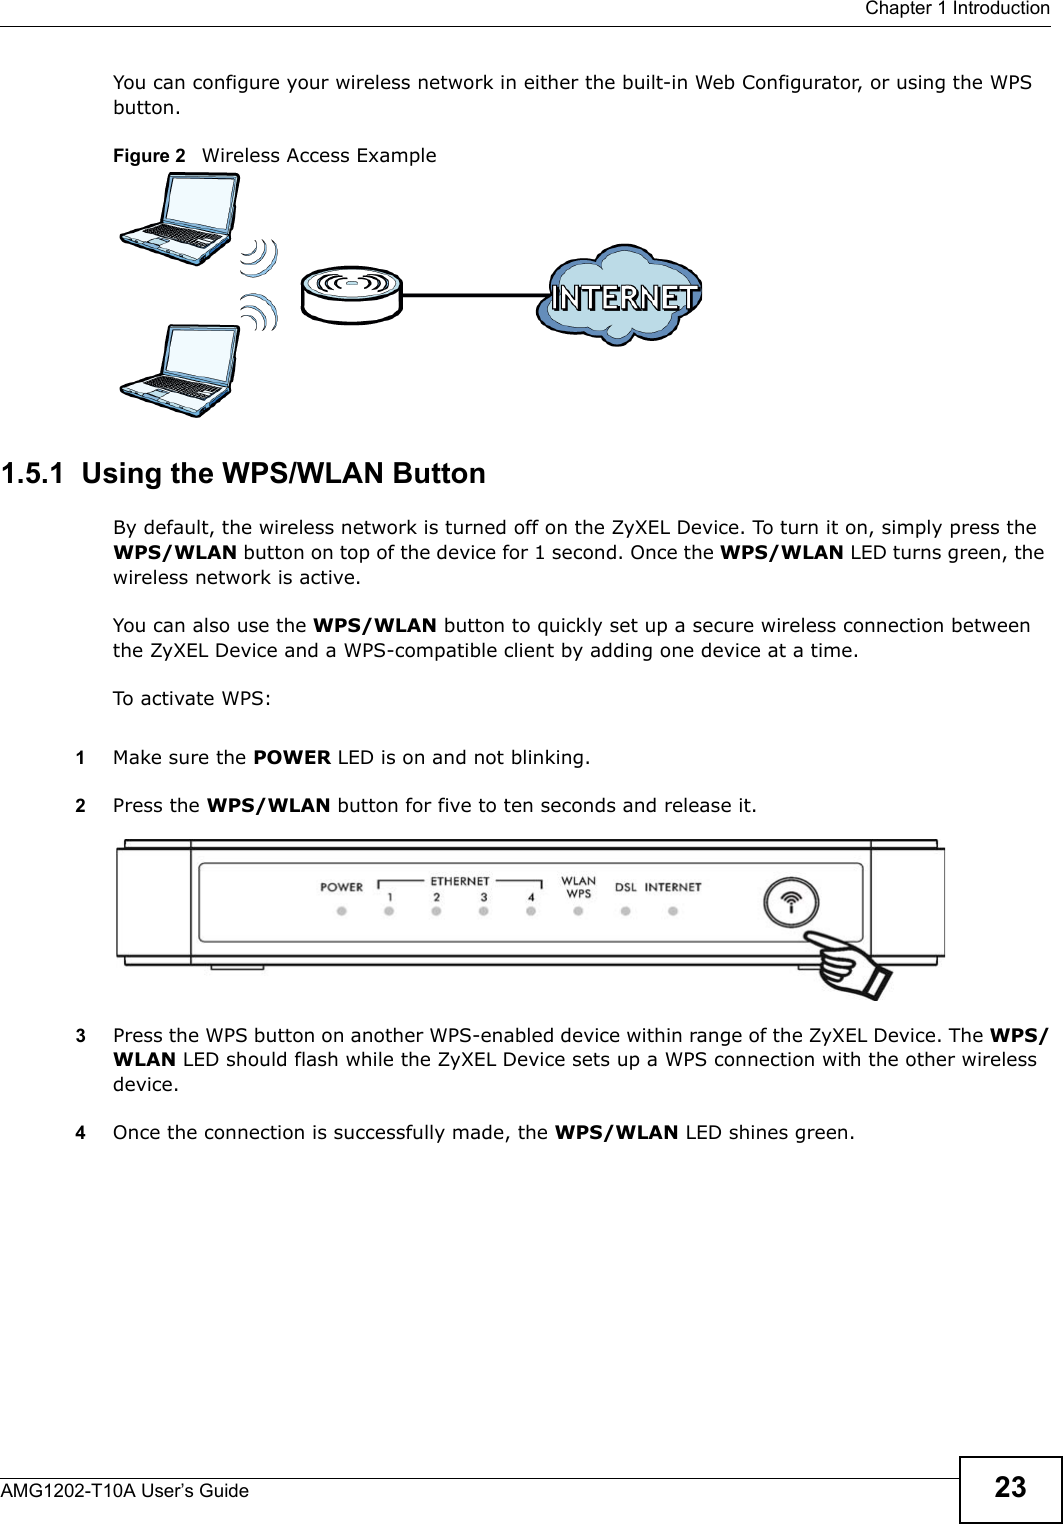  Chapter 1 IntroductionAMG1202-T10A User’s Guide 23You can configure your wireless network in either the built-in Web Configurator, or using the WPS button.Figure 2   Wireless Access Example1.5.1  Using the WPS/WLAN ButtonBy default, the wireless network is turned off on the ZyXEL Device. To turn it on, simply press the WPS/WLAN button on top of the device for 1 second. Once the WPS/WLAN LED turns green, the wireless network is active.You can also use the WPS/WLAN button to quickly set up a secure wireless connection between the ZyXEL Device and a WPS-compatible client by adding one device at a time.To activate WPS:1Make sure the POWER LED is on and not blinking.2Press the WPS/WLAN button for five to ten seconds and release it. 3Press the WPS button on another WPS-enabled device within range of the ZyXEL Device. The WPS/WLAN LED should flash while the ZyXEL Device sets up a WPS connection with the other wireless device. 4Once the connection is successfully made, the WPS/WLAN LED shines green.